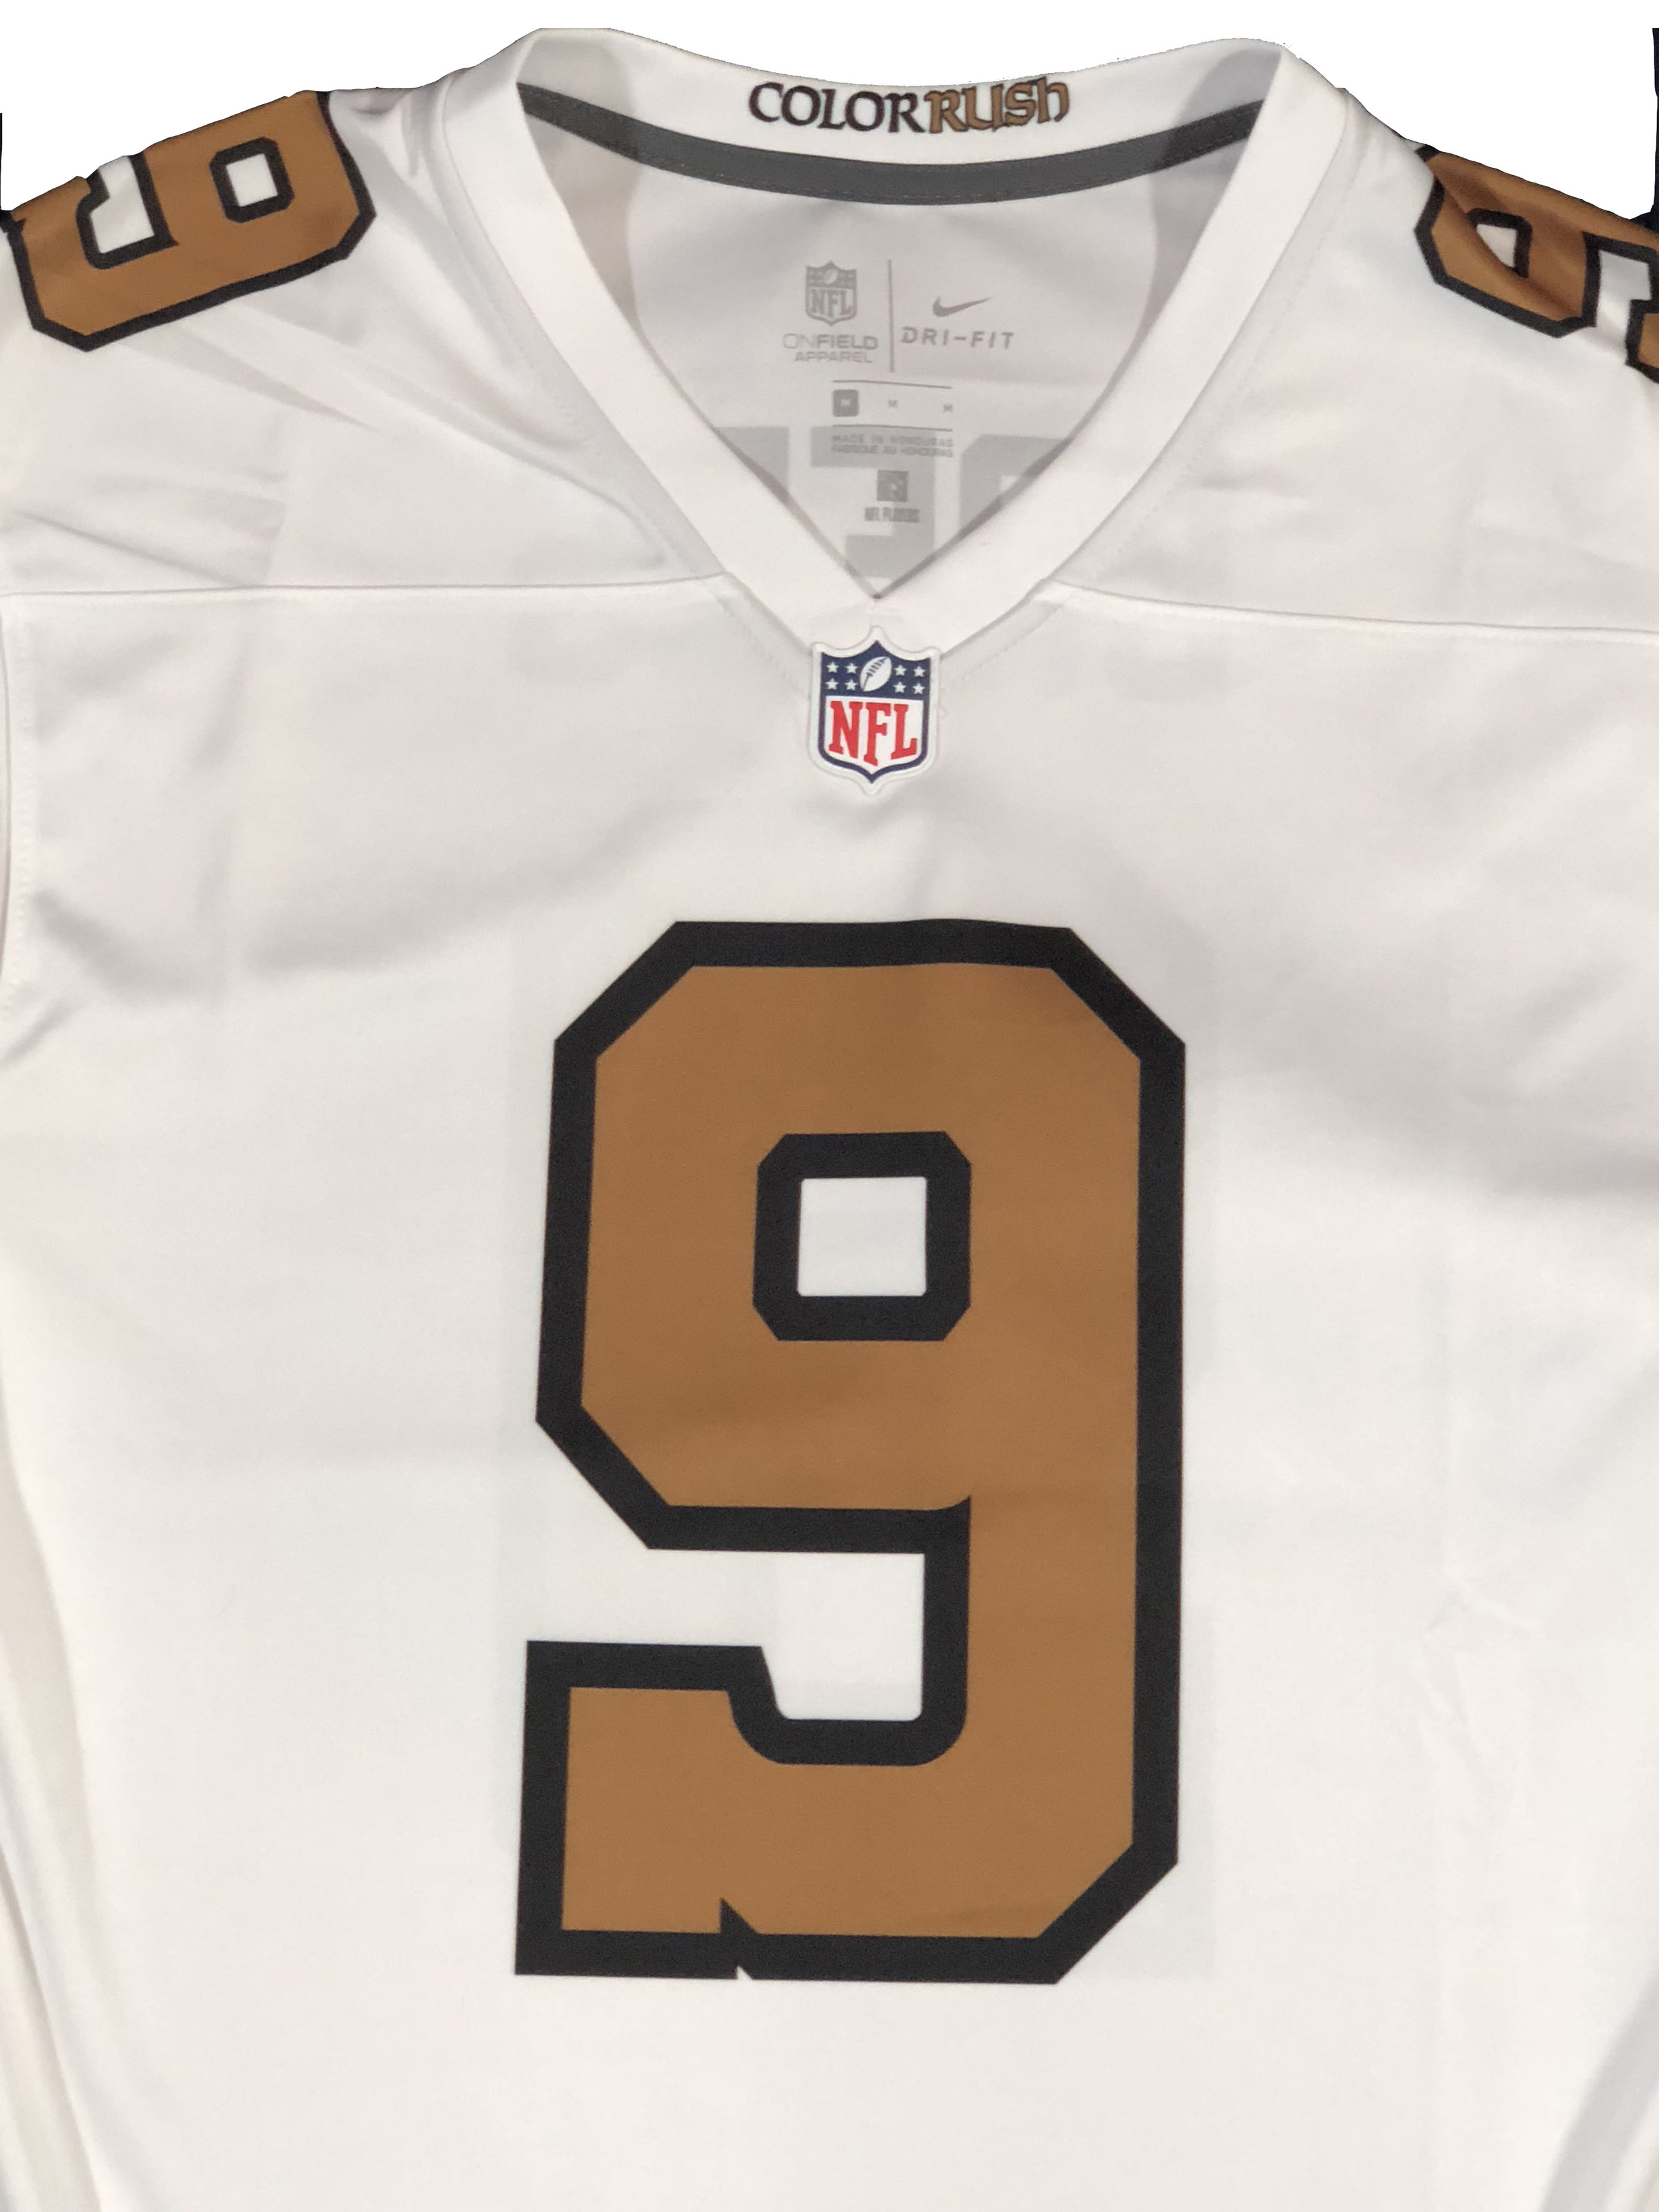 drew brees jersey color rush